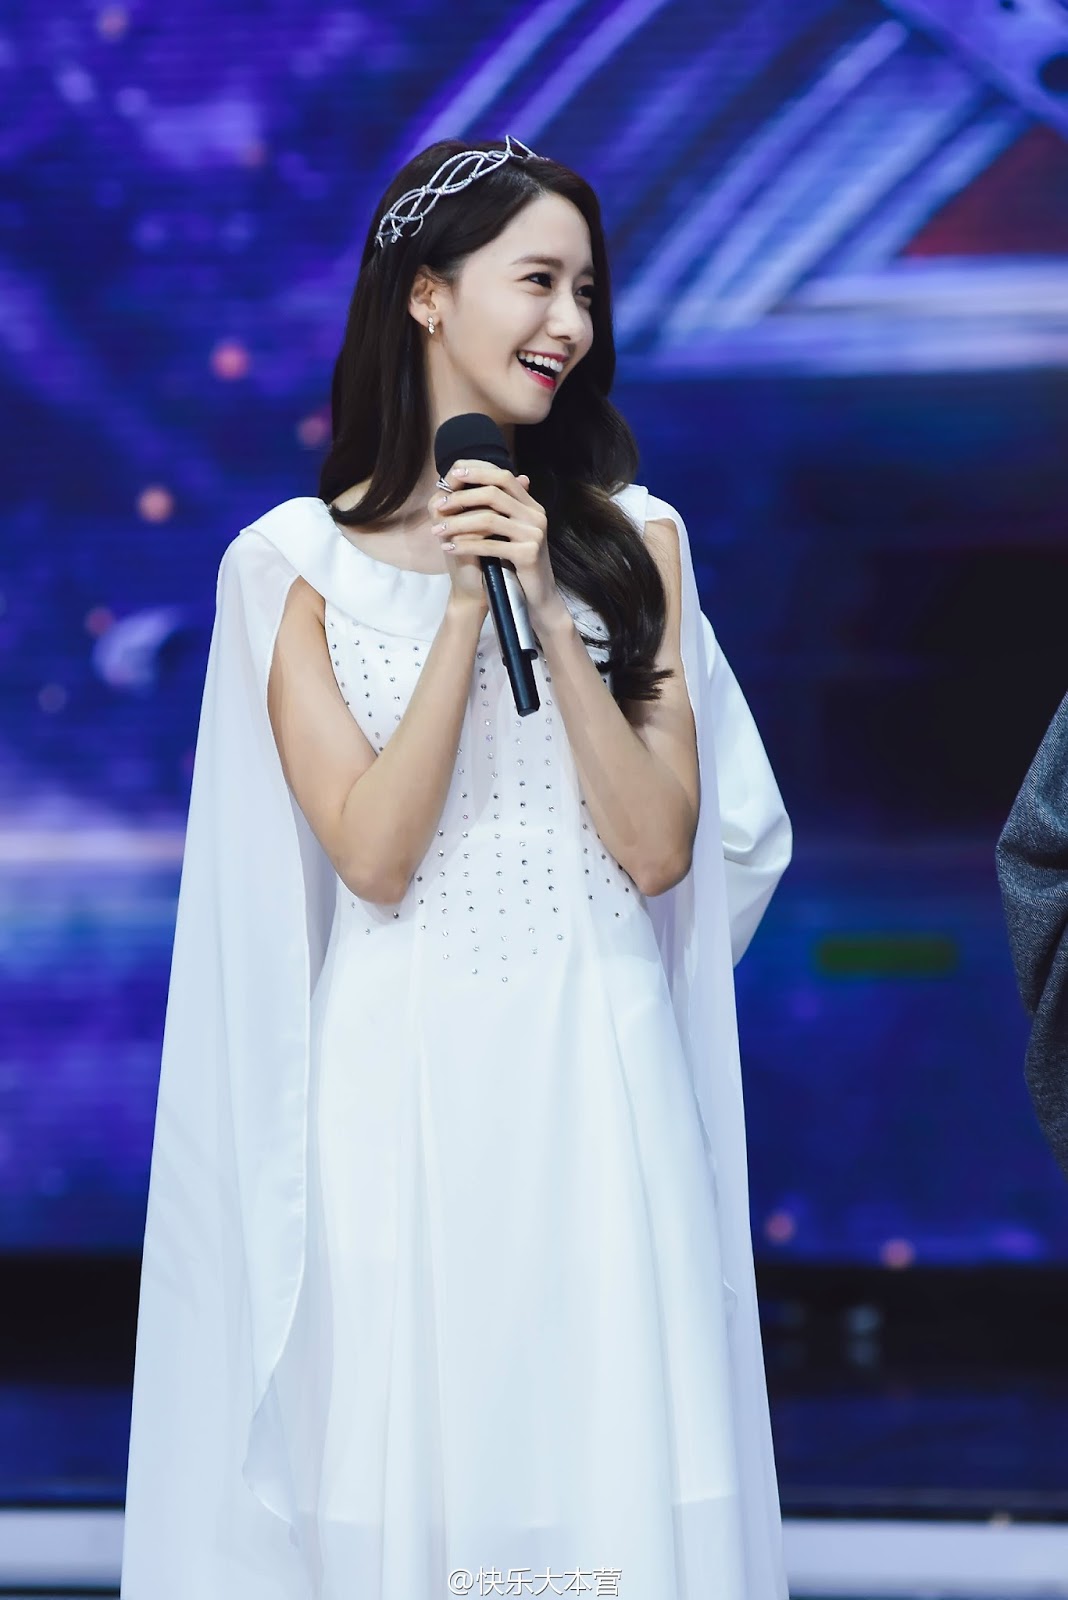 Teaser Clip and Pictures for SNSD's YoonA on 'Happy Camp' revealed ...